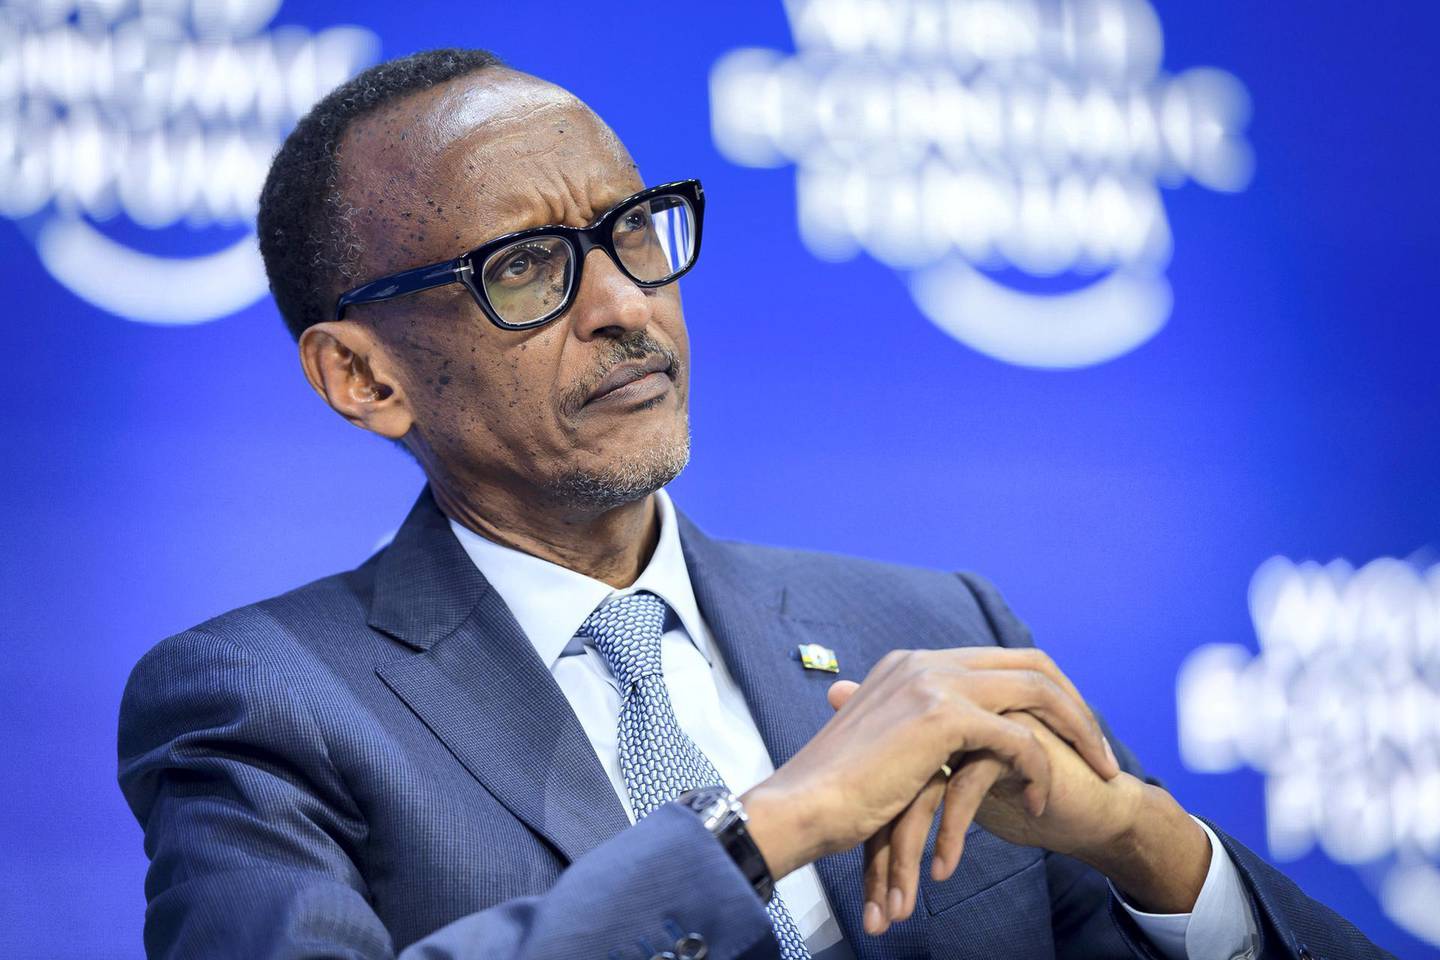 Rwandann President Paul Kagame attends a session during the World Economic Forum (WEF) annual meeting on January 24, 2019, in Davos, eastern Switzerland. (Photo by Fabrice COFFRINI / AFP)